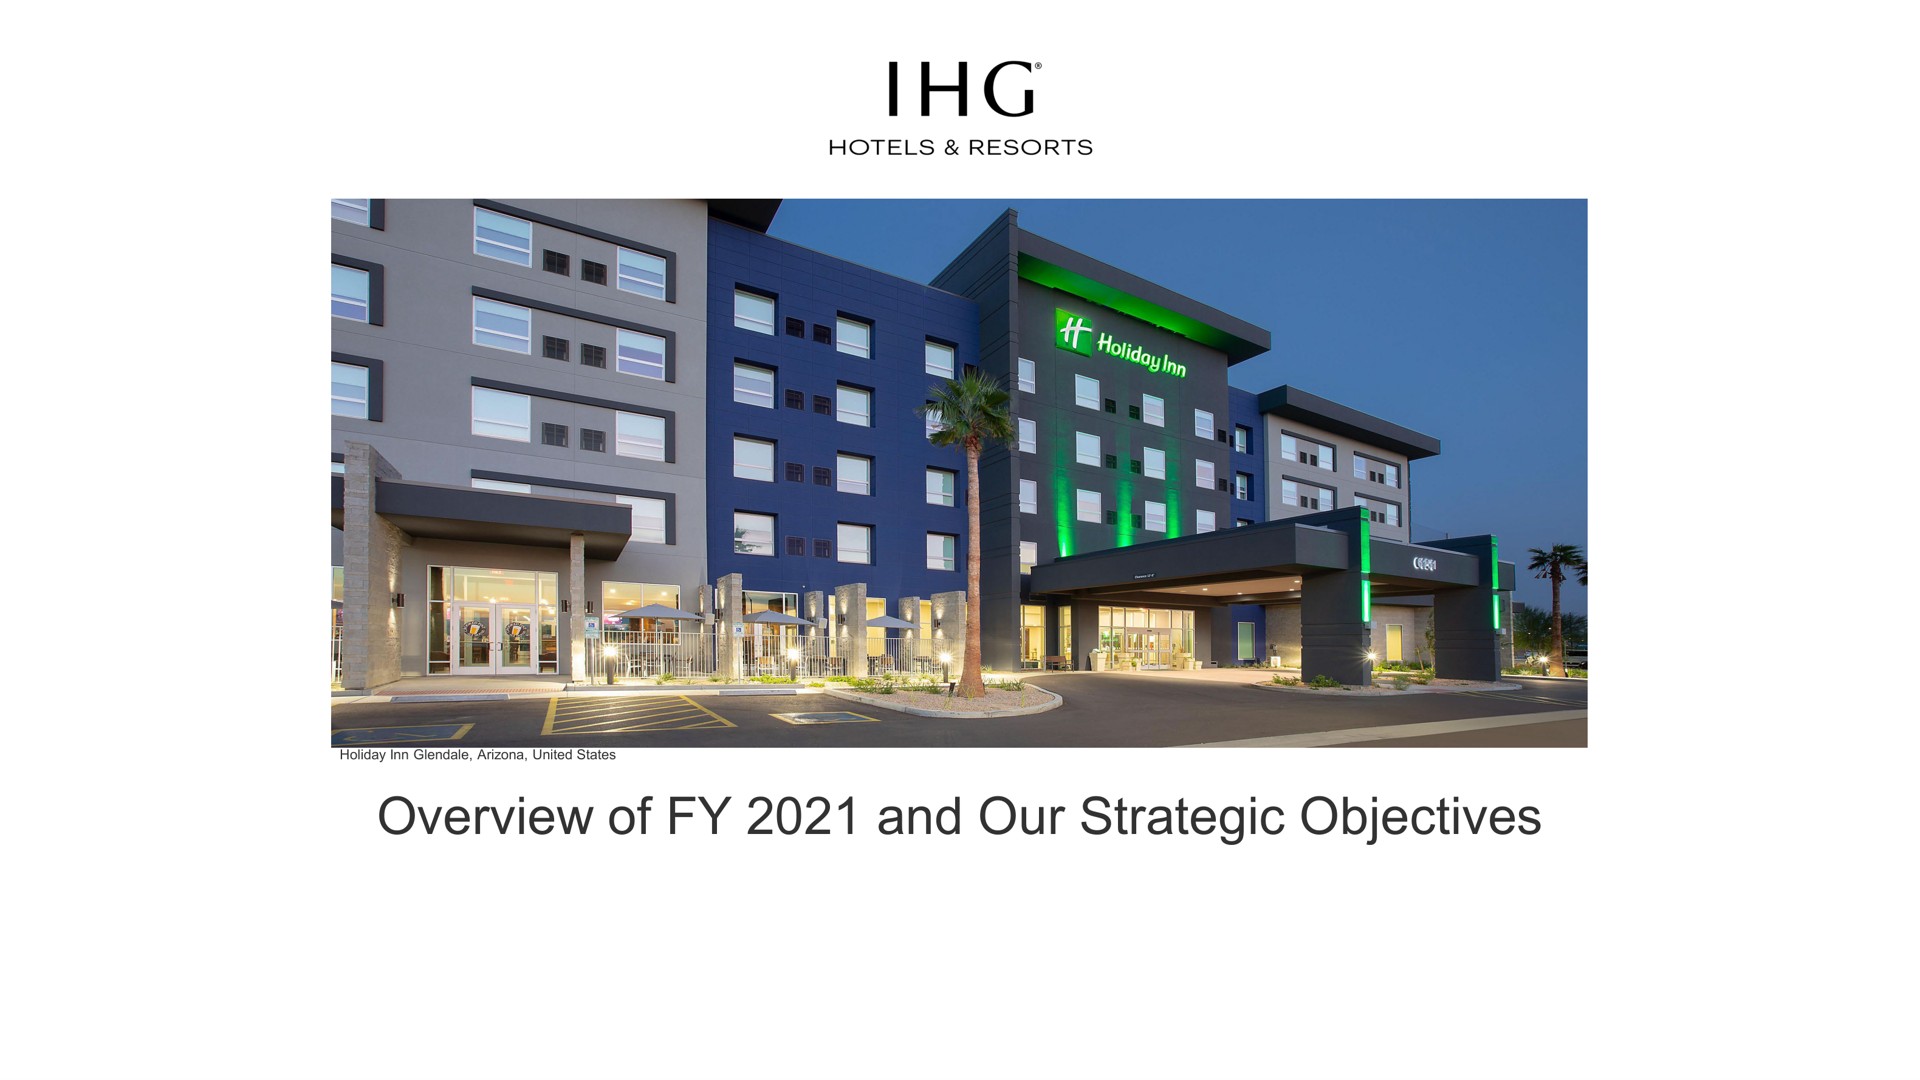 overview of and our strategic objectives | IHG Hotels